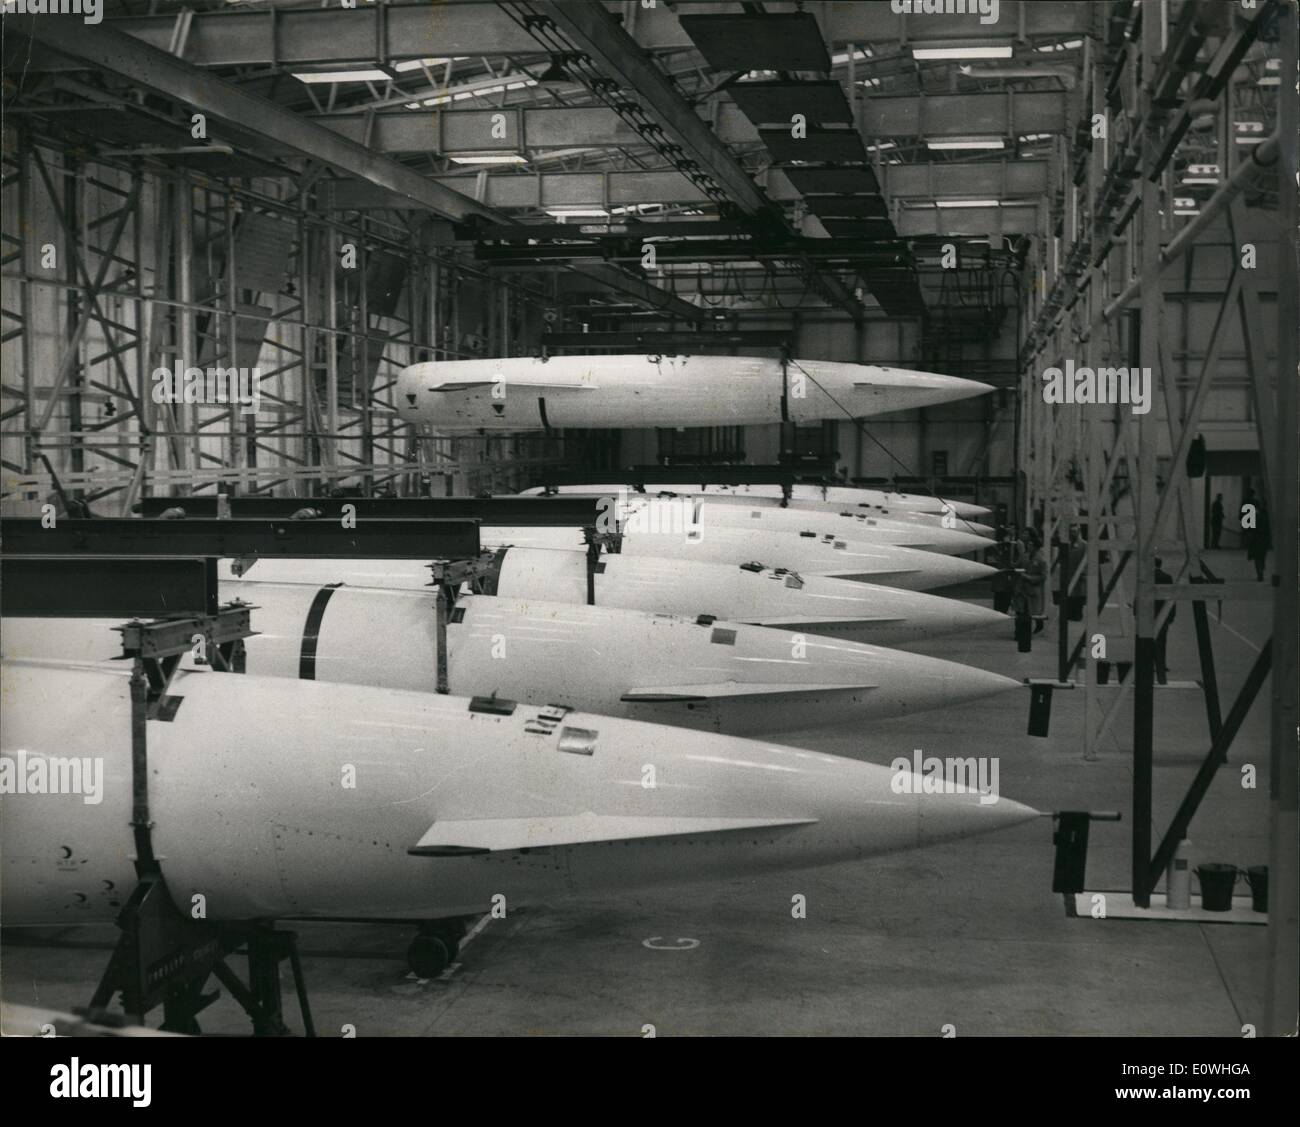 Feb. 02, 1963 - ''Blue Steel'' shown to the press at R.A.F.Scampton general view in the Missile Store : Member of the press paid a visit today to the secret 'V' Bomber at Scampton - where they were shown ''Blue Steel'' the British Nuclear Warhead - which will be carried by the R.A.F's Vulcan and Victor Jet Bombers. The Commander-in-Chief Bomber Command - Sir Kenneth Cross said that in tests - Blue Steel had exceeded the specification in respect of range - accuracy and reliability. Stock Photo